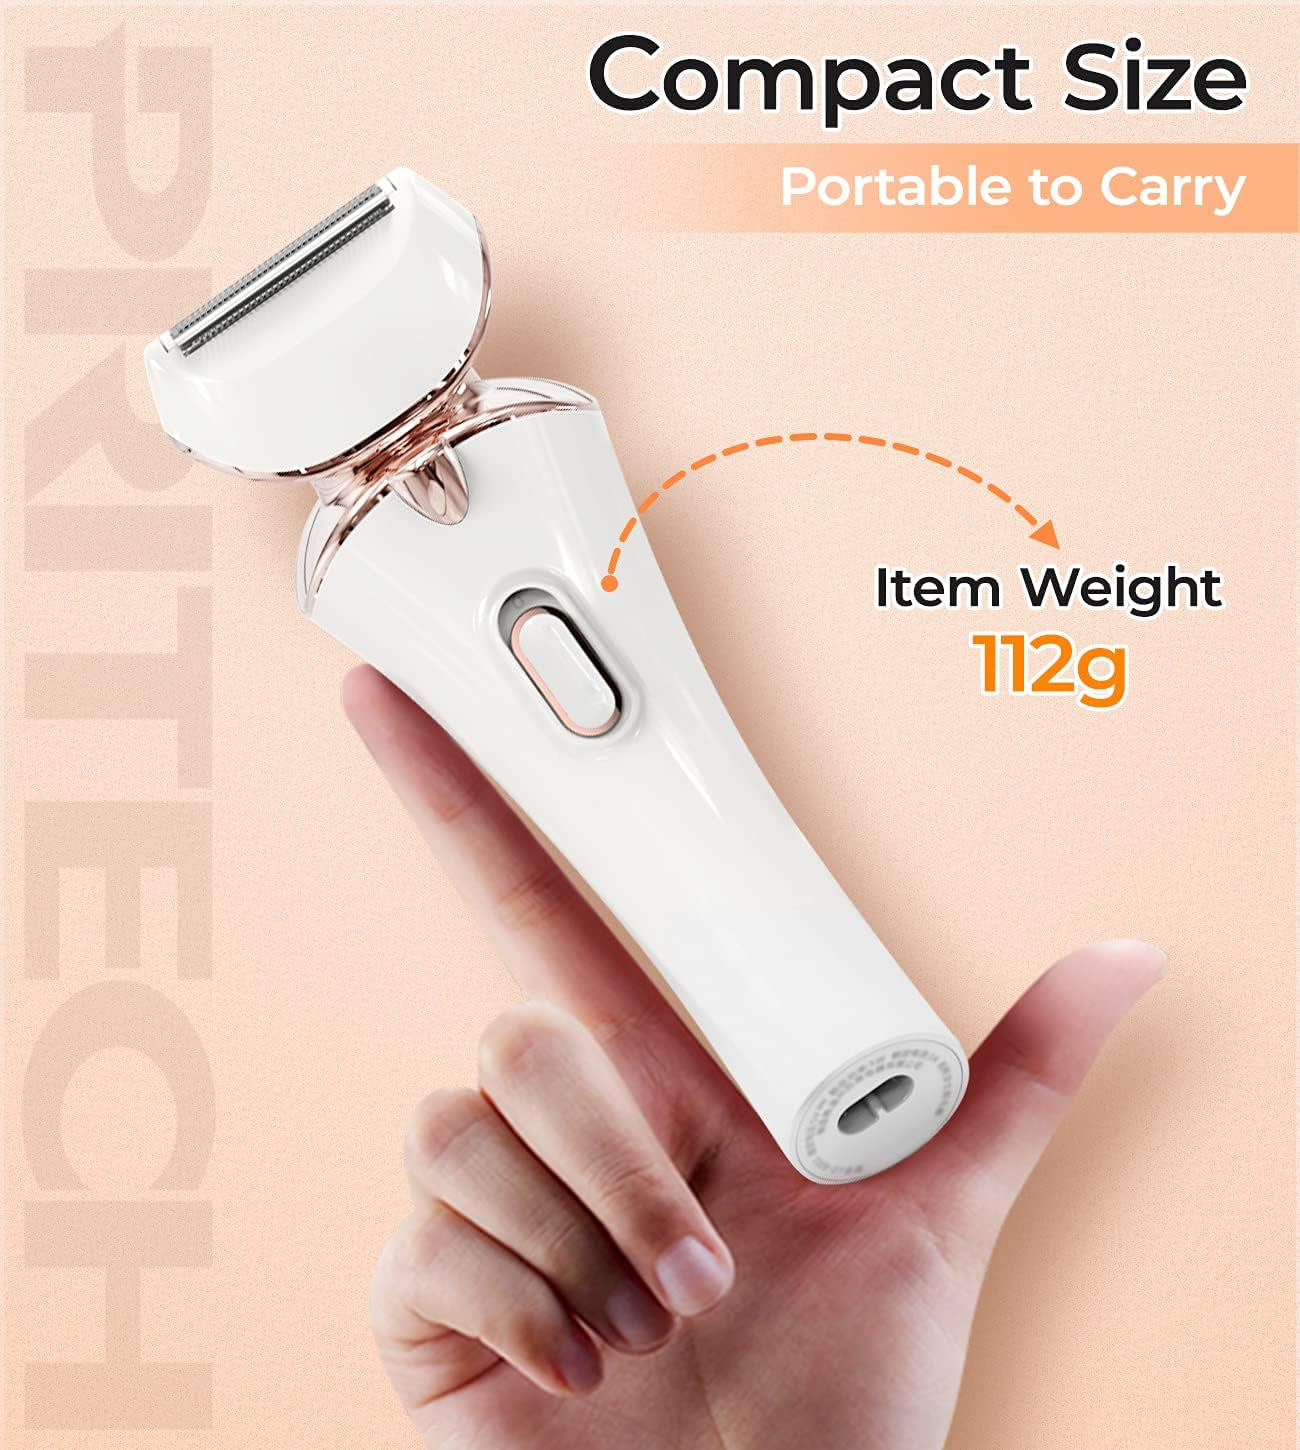 Electric Shaver for Women,Ladies Shaver,Lady Razor for Legs,Arm,Underarm,Bikini,Usb Rechargeable Razor Wet&Dry Cordless for Woman by PRITECH